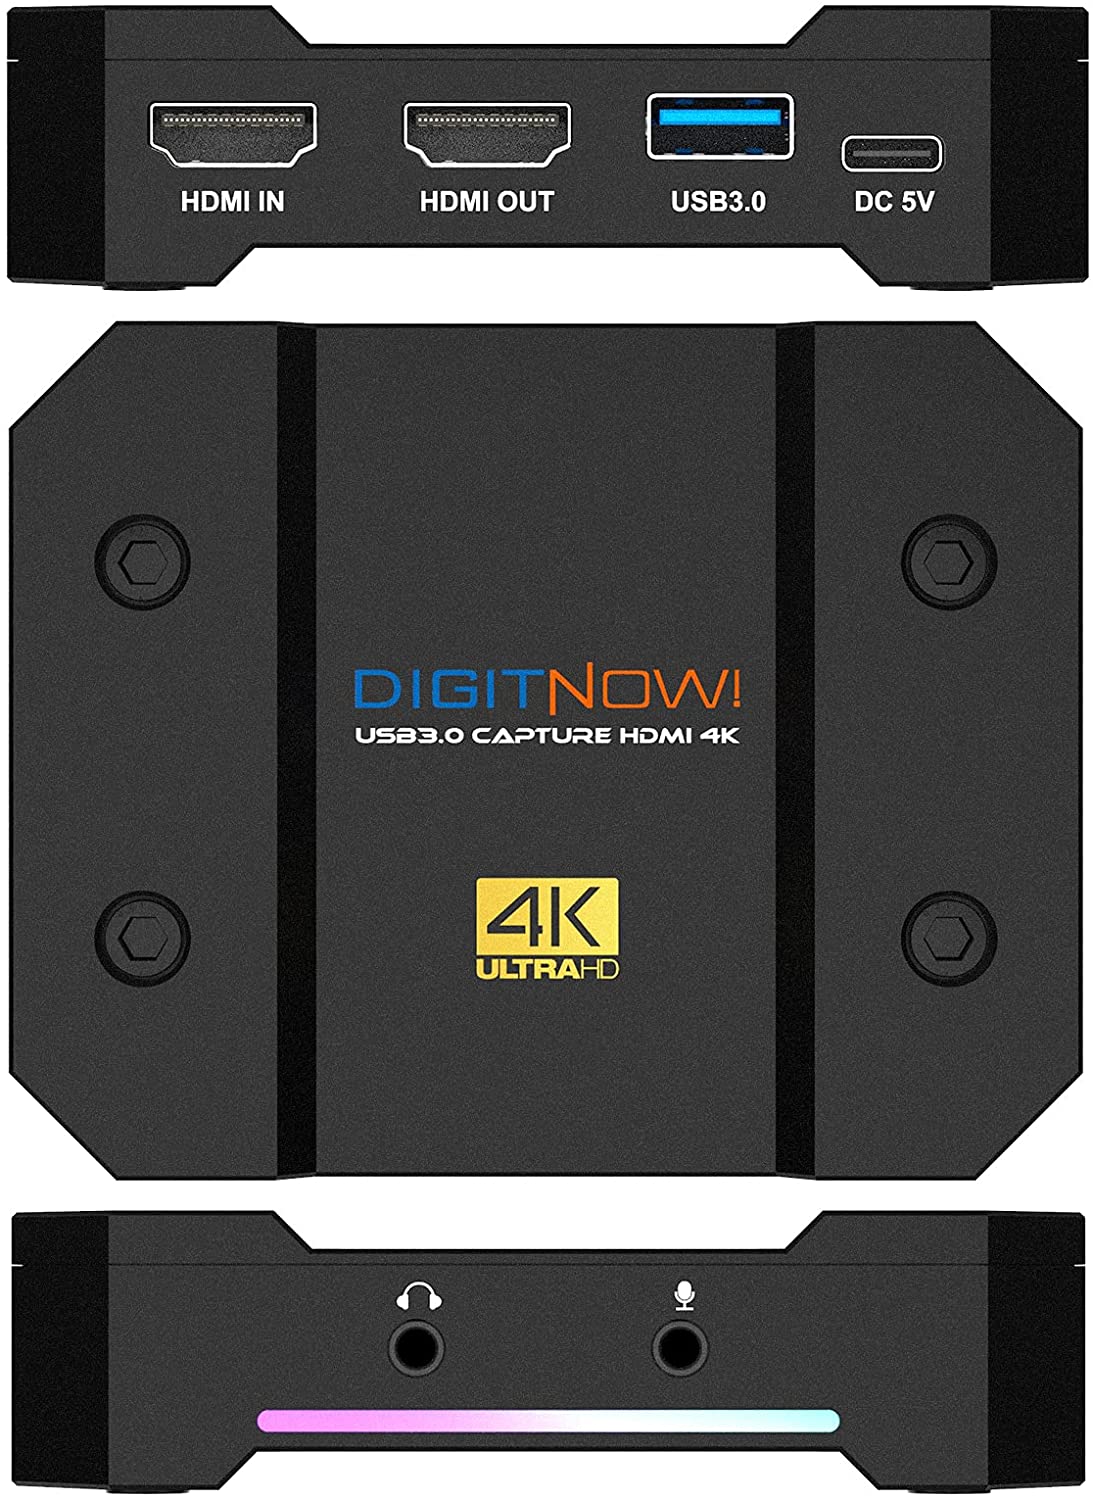 DIGITNOW USB Video Capture Card 4k/60Hz HDR10 Zero-Lag Passthrough, Ultra-Low Latency, Full HD Video Recording for PS5, PS4/Pro, Xbox Series X/S, Xbox One X/S, Real USB3.0